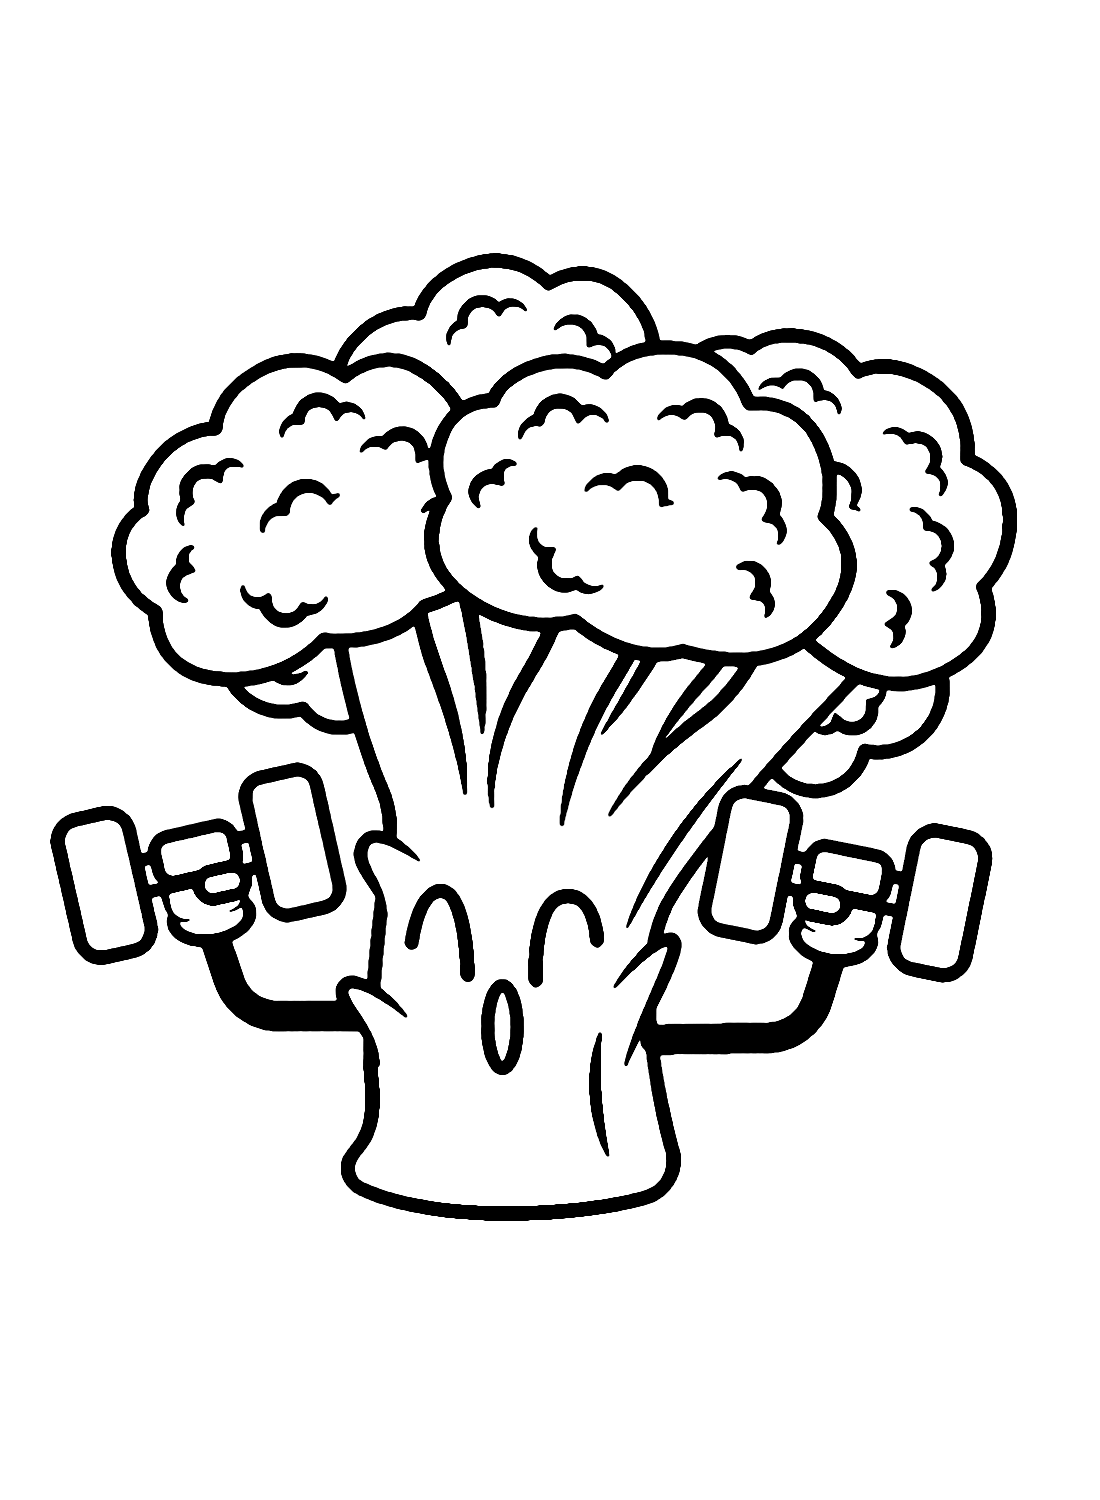 Broccoli Carrying Dumbbell Coloring Pages